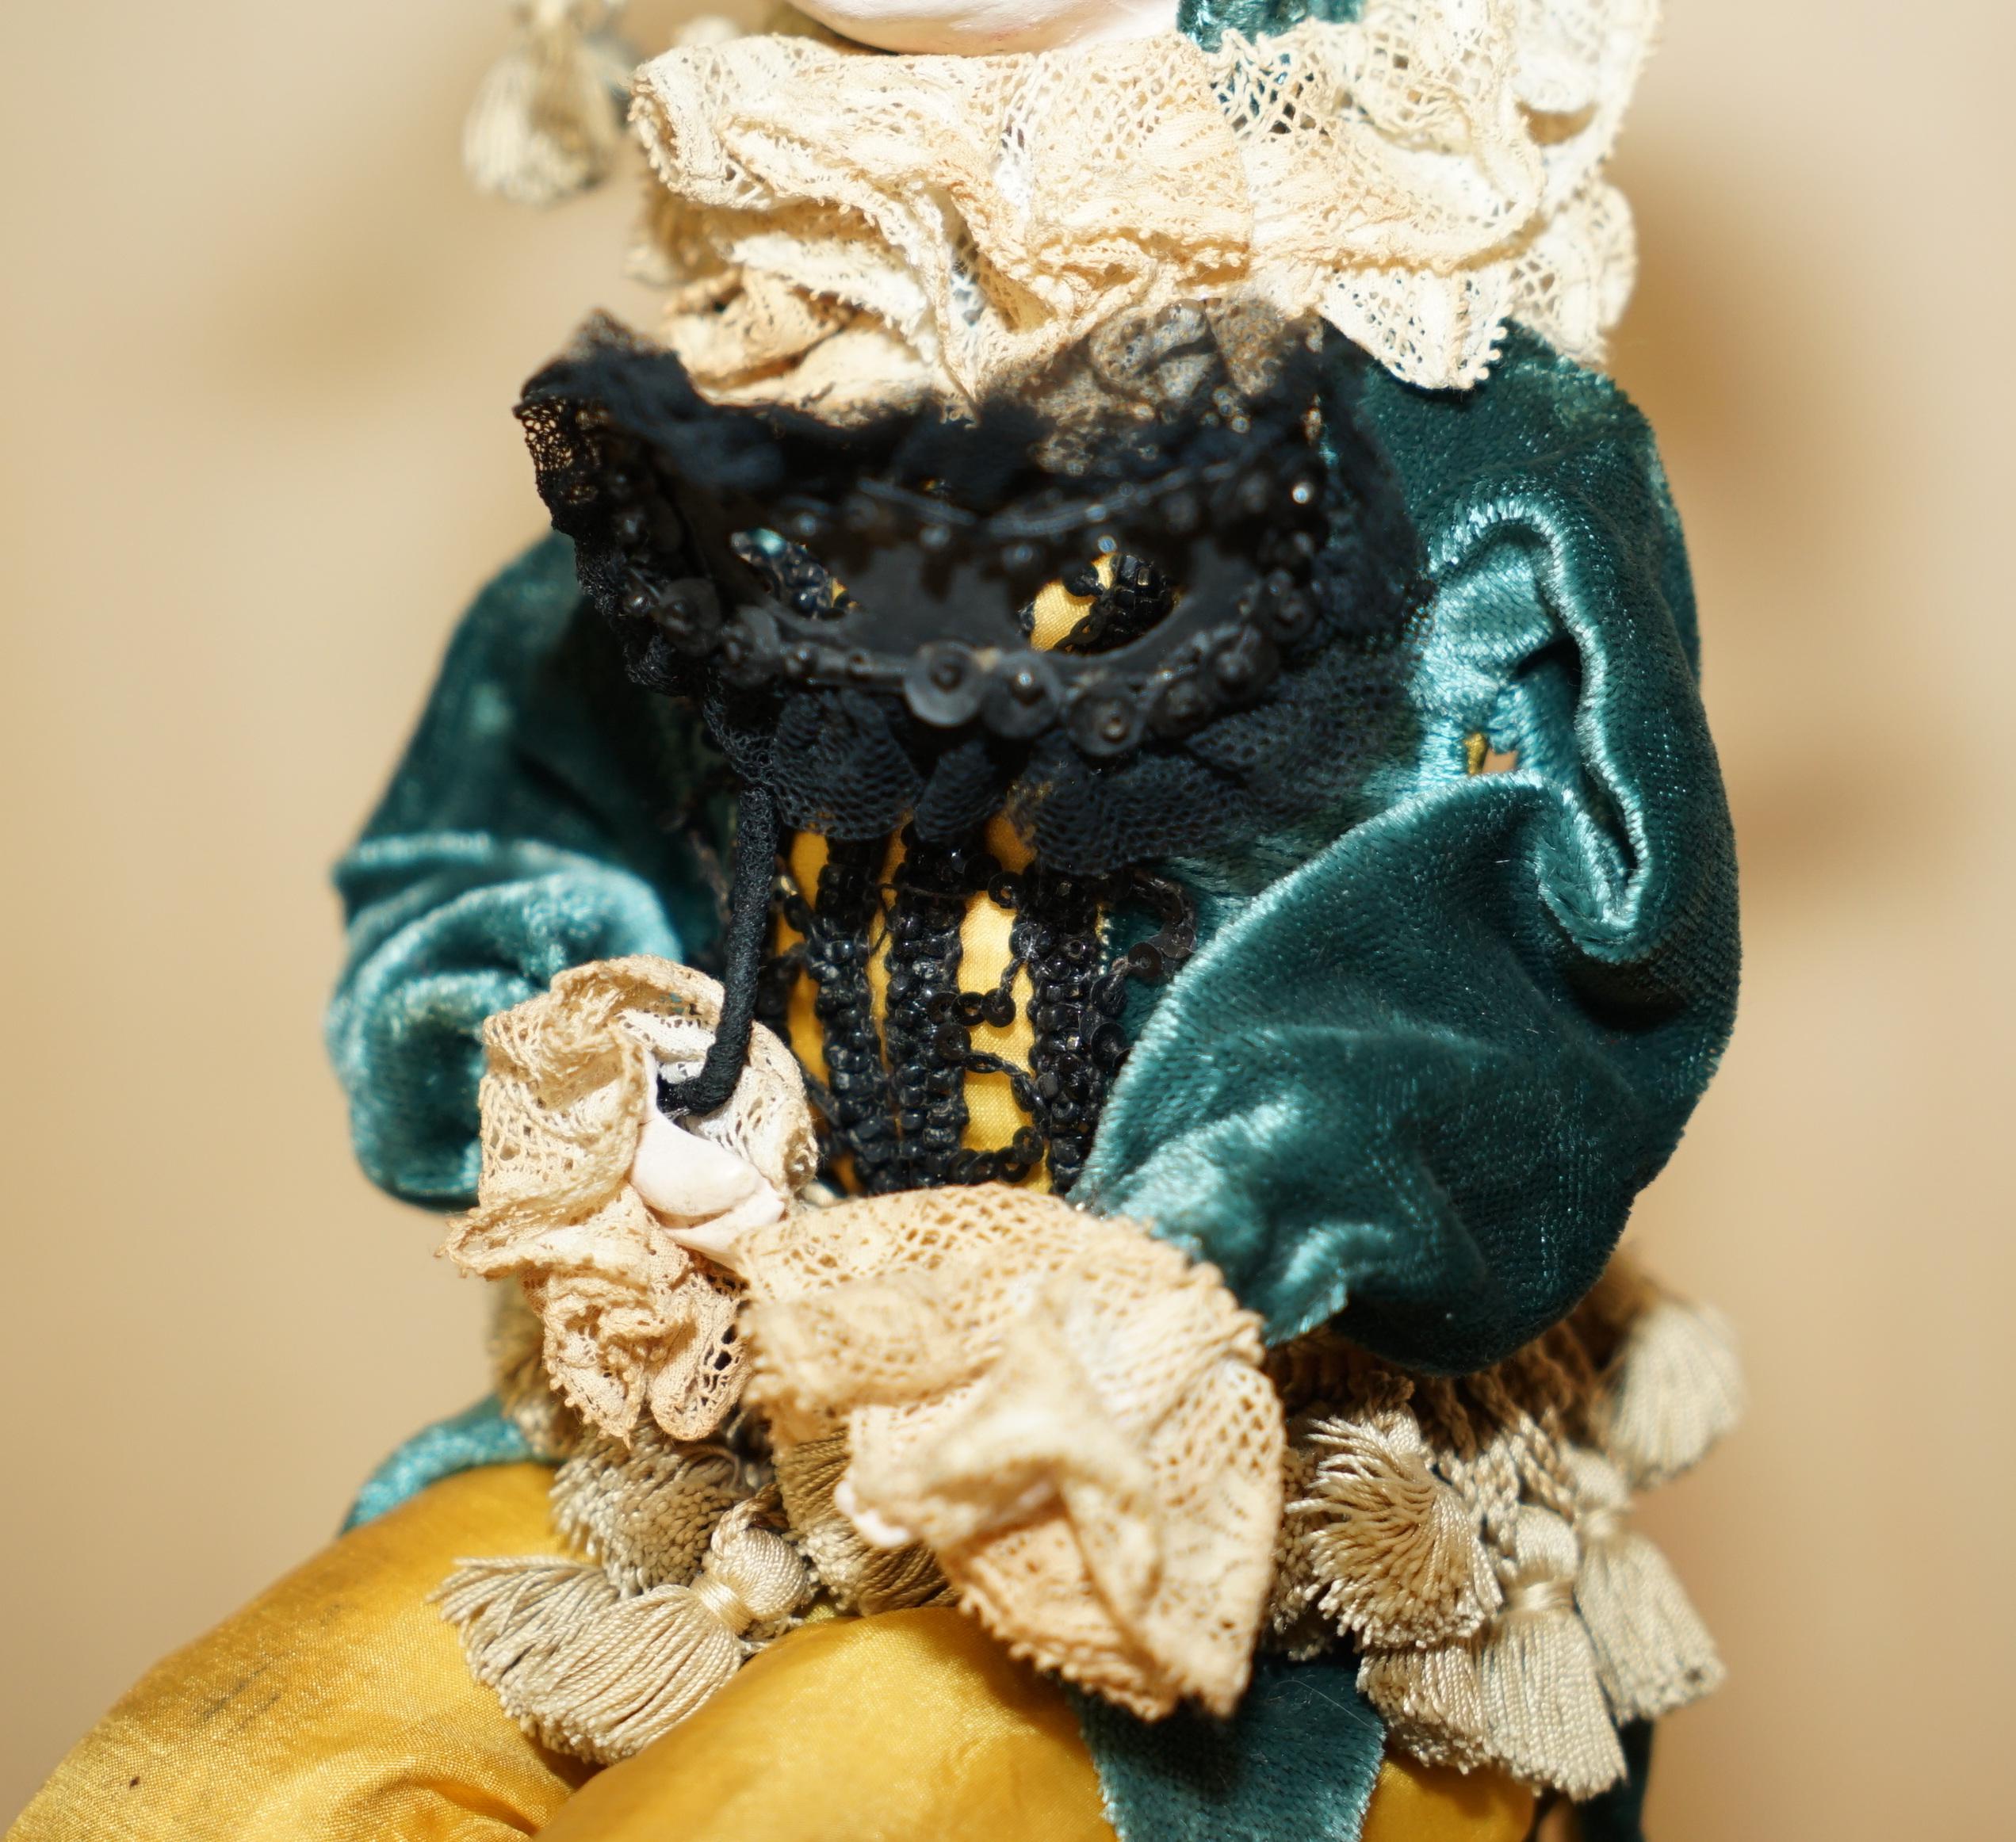 Edwardian ANTiQUE FRENCH HAND MADE MUSICAL AUTOMATON JESTER CLOWN THAT PLAYS MUSIC & MOVES For Sale